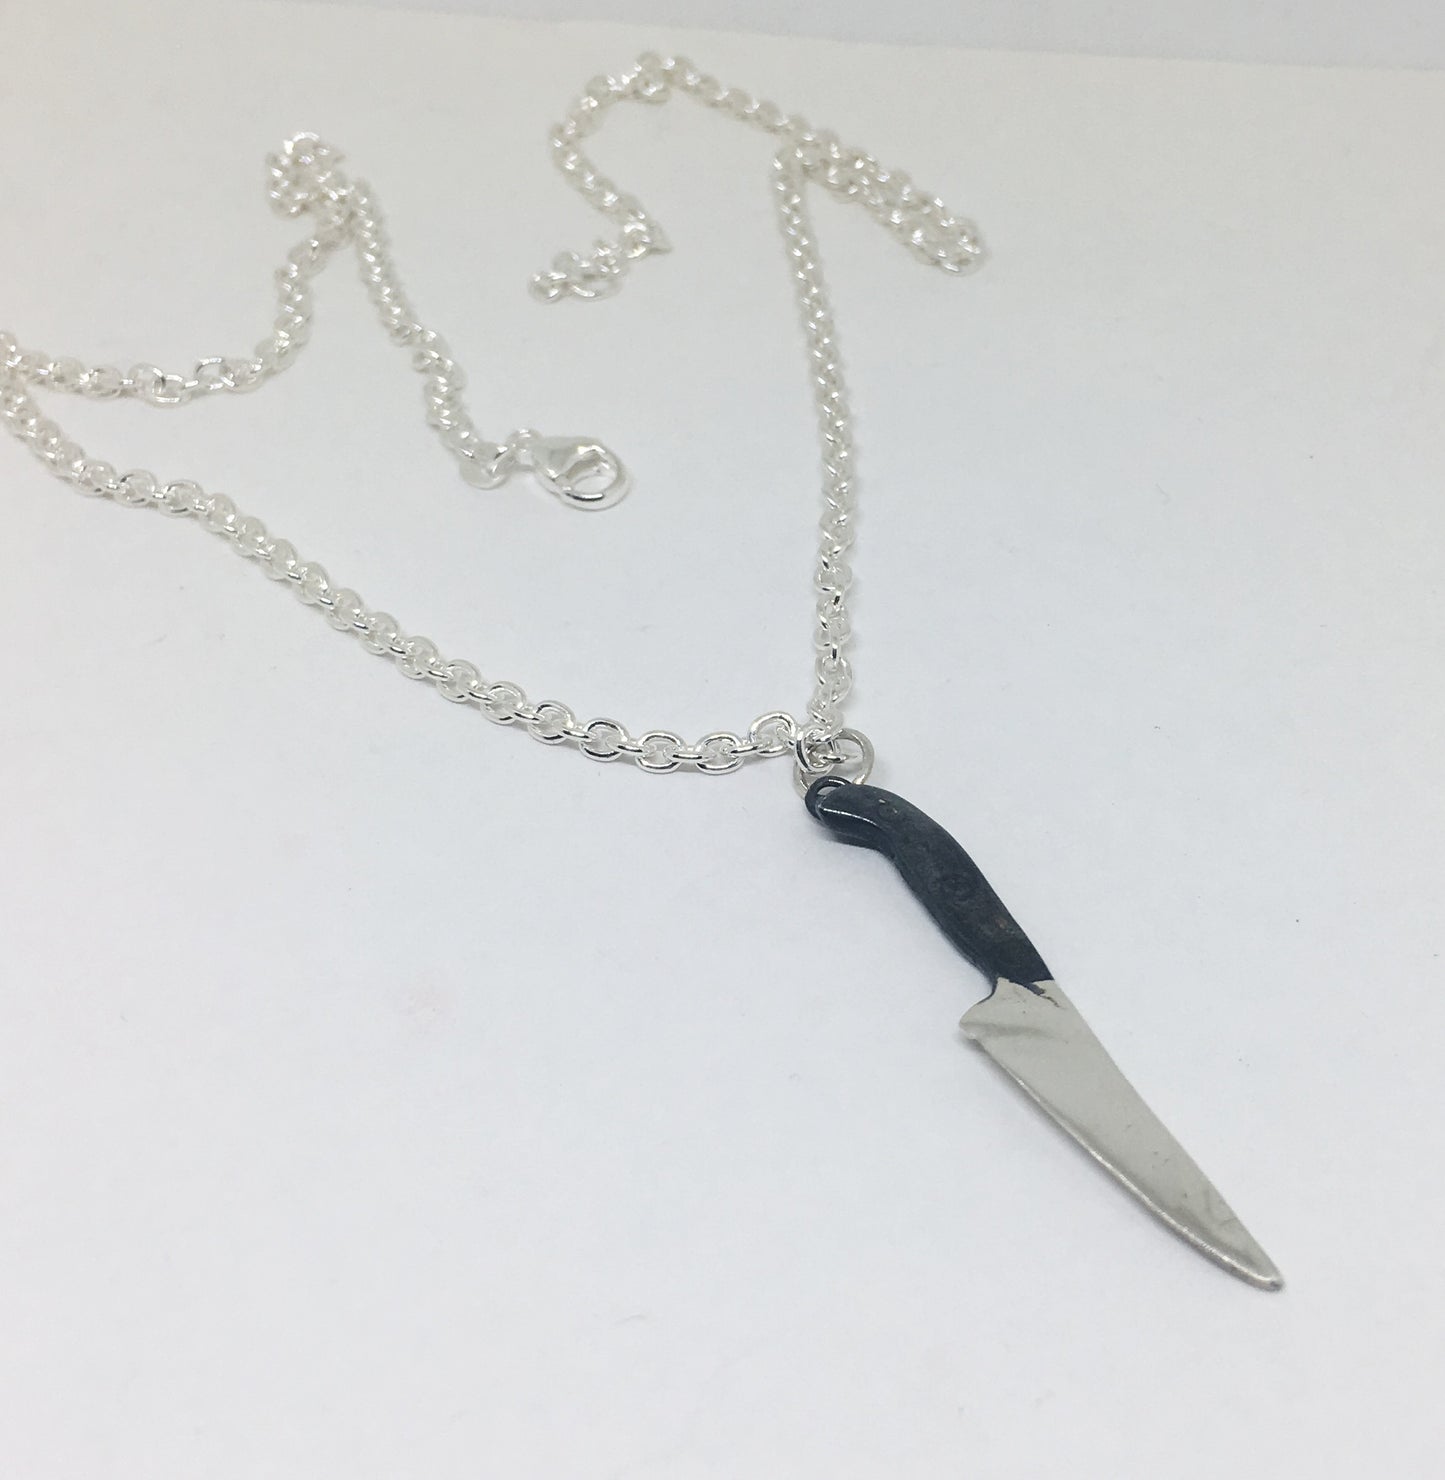 Large Sterling Chef Knife Pendant Necklace with Black Handle